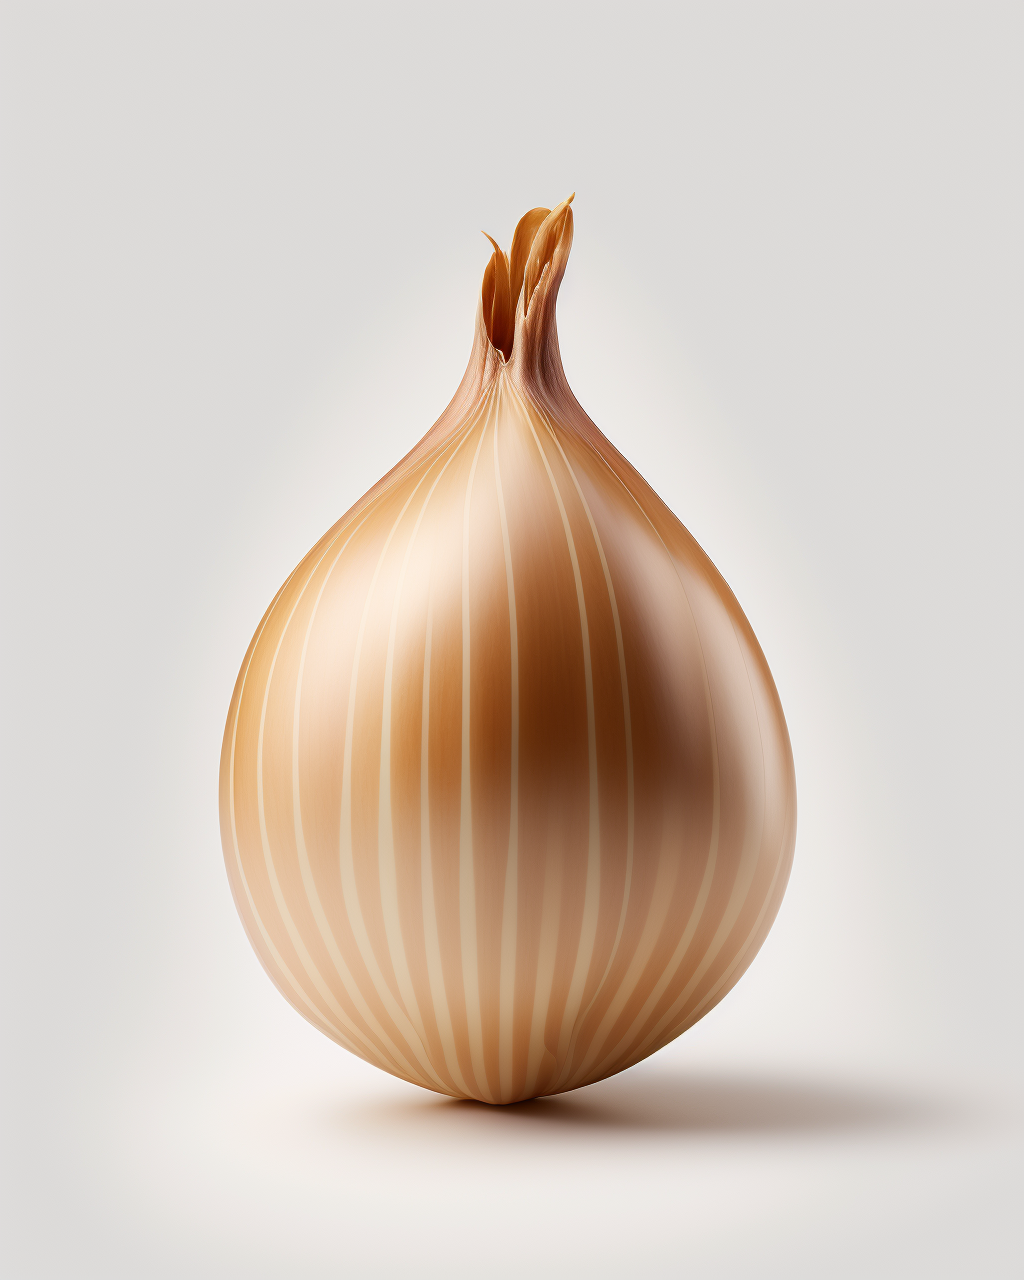 shallot as white onion substitute